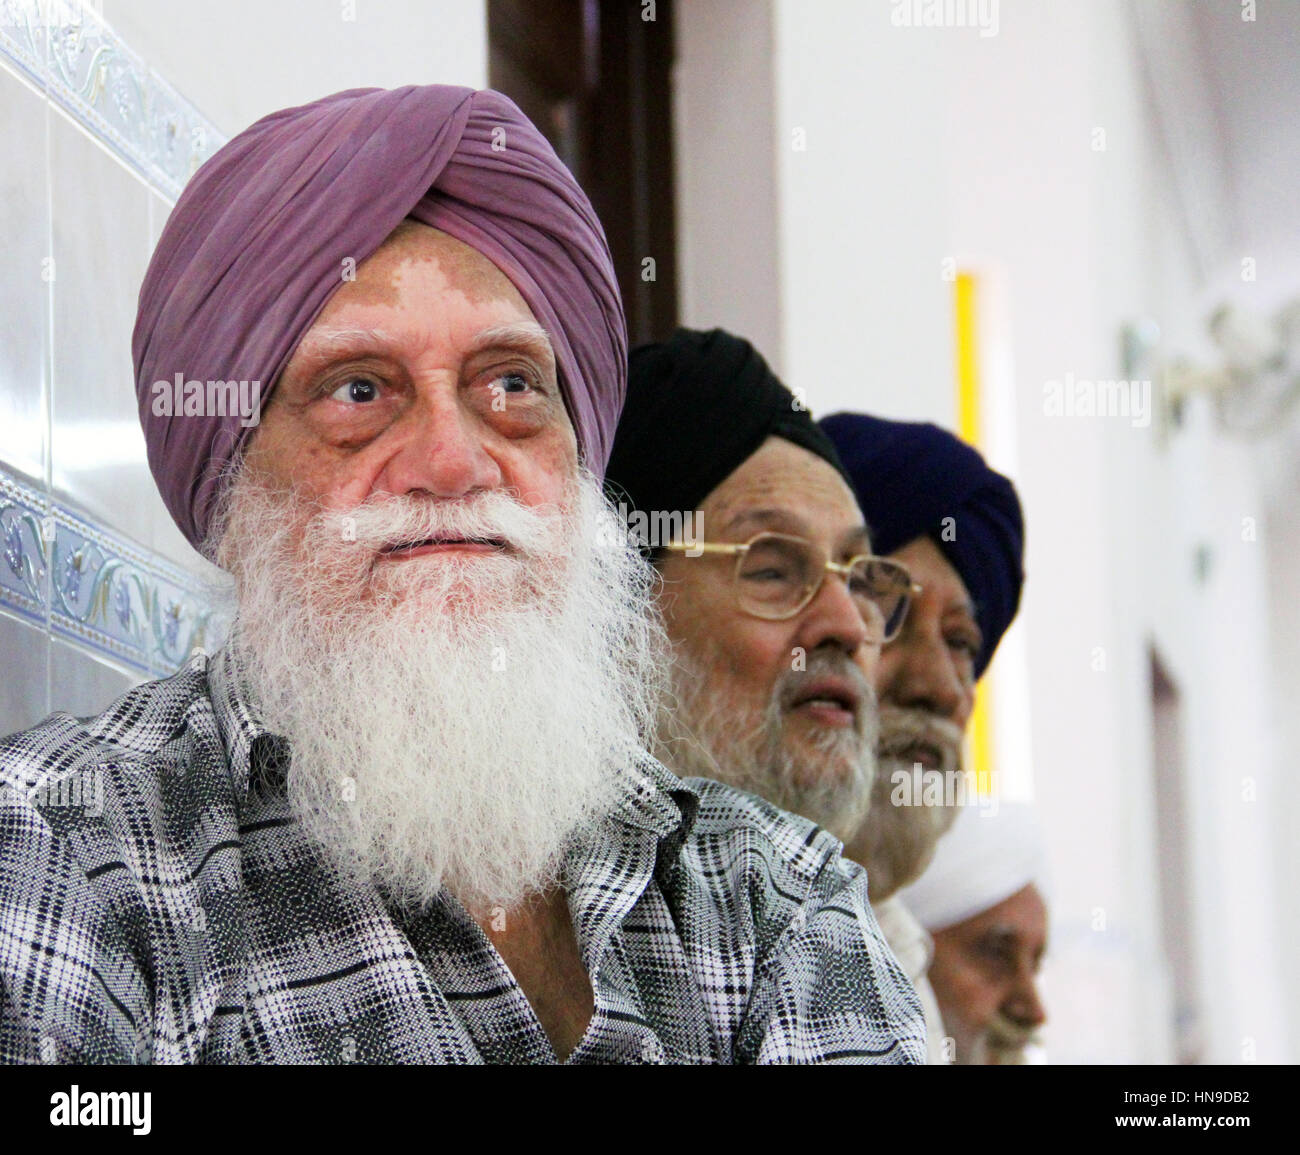 An elderly Indian Sikh man with a long white beard wearing a turban with the vitiligo skin disorder at a Sikh Wedding in Malaysia Stock Photo